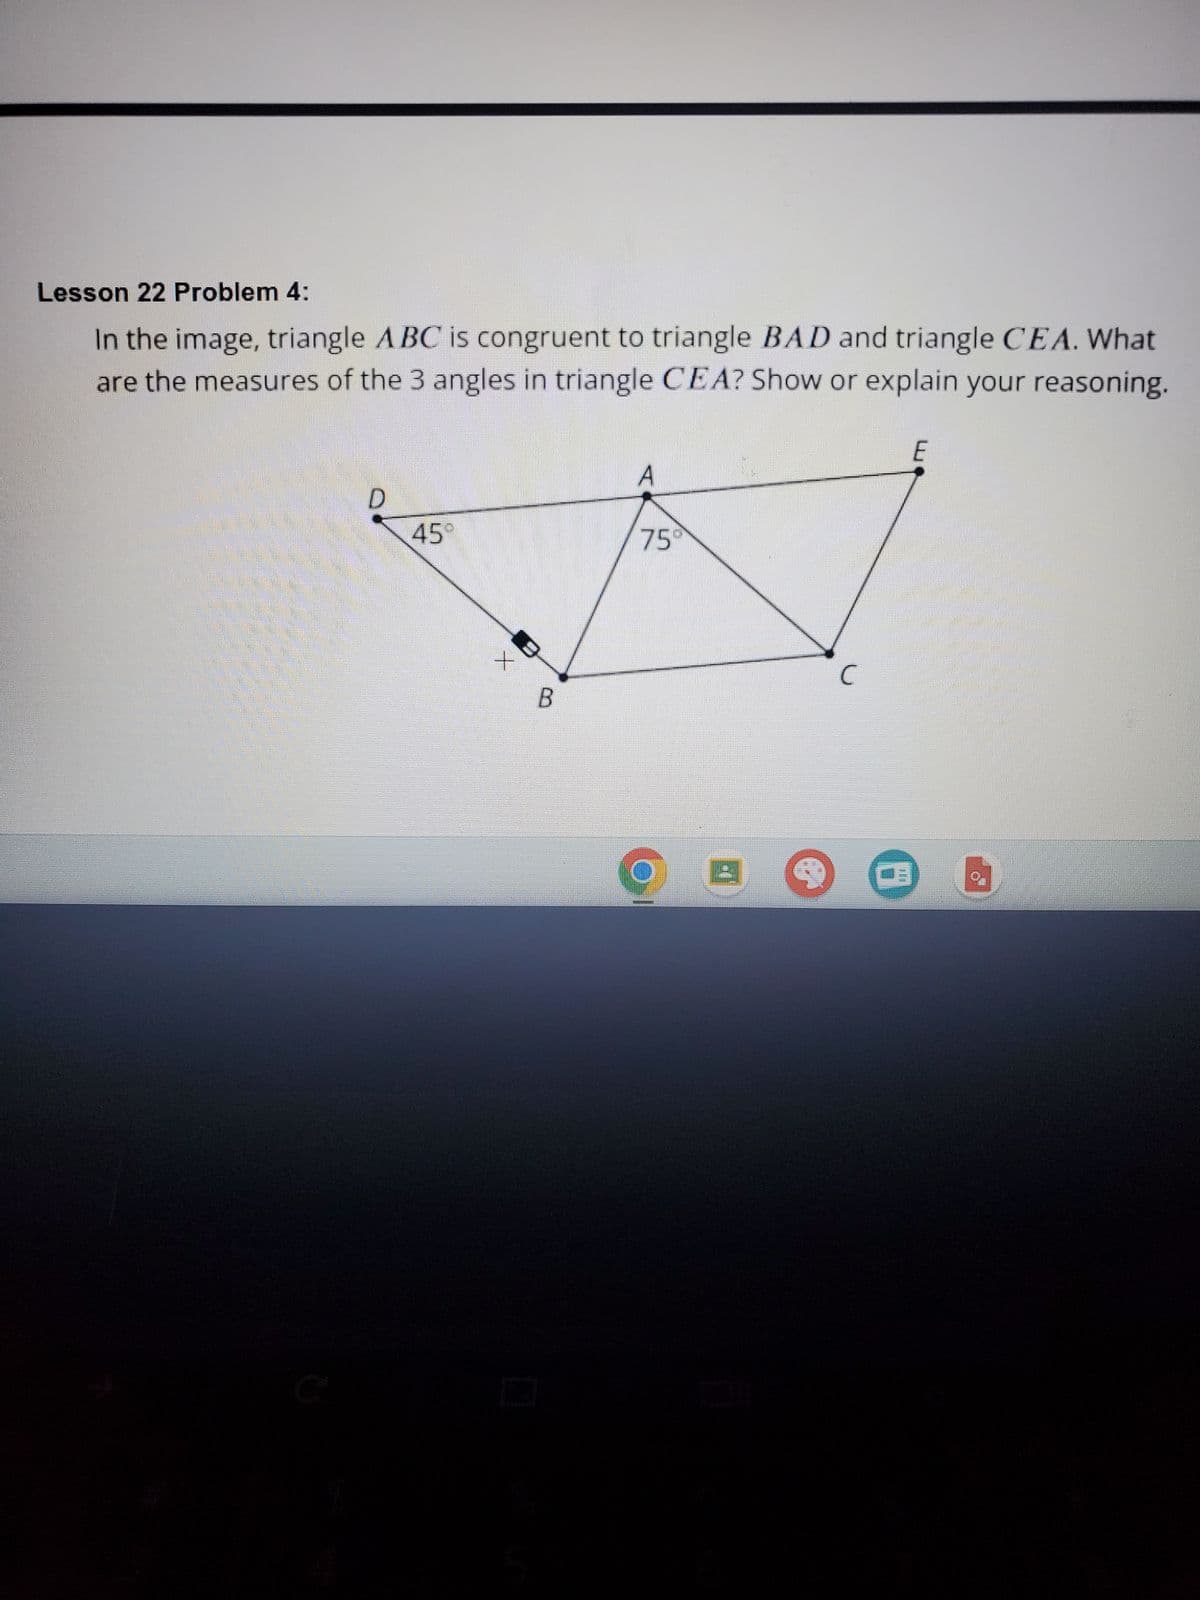 Lesson 22 Problem 4:
In the image, triangle ABC is congruent to triangle BAD and triangle CEA. What
are the measures of the 3 angles in triangle CEA? Show or explain your reasoning.
D
45°
+
B
A
75
4
C
0
E